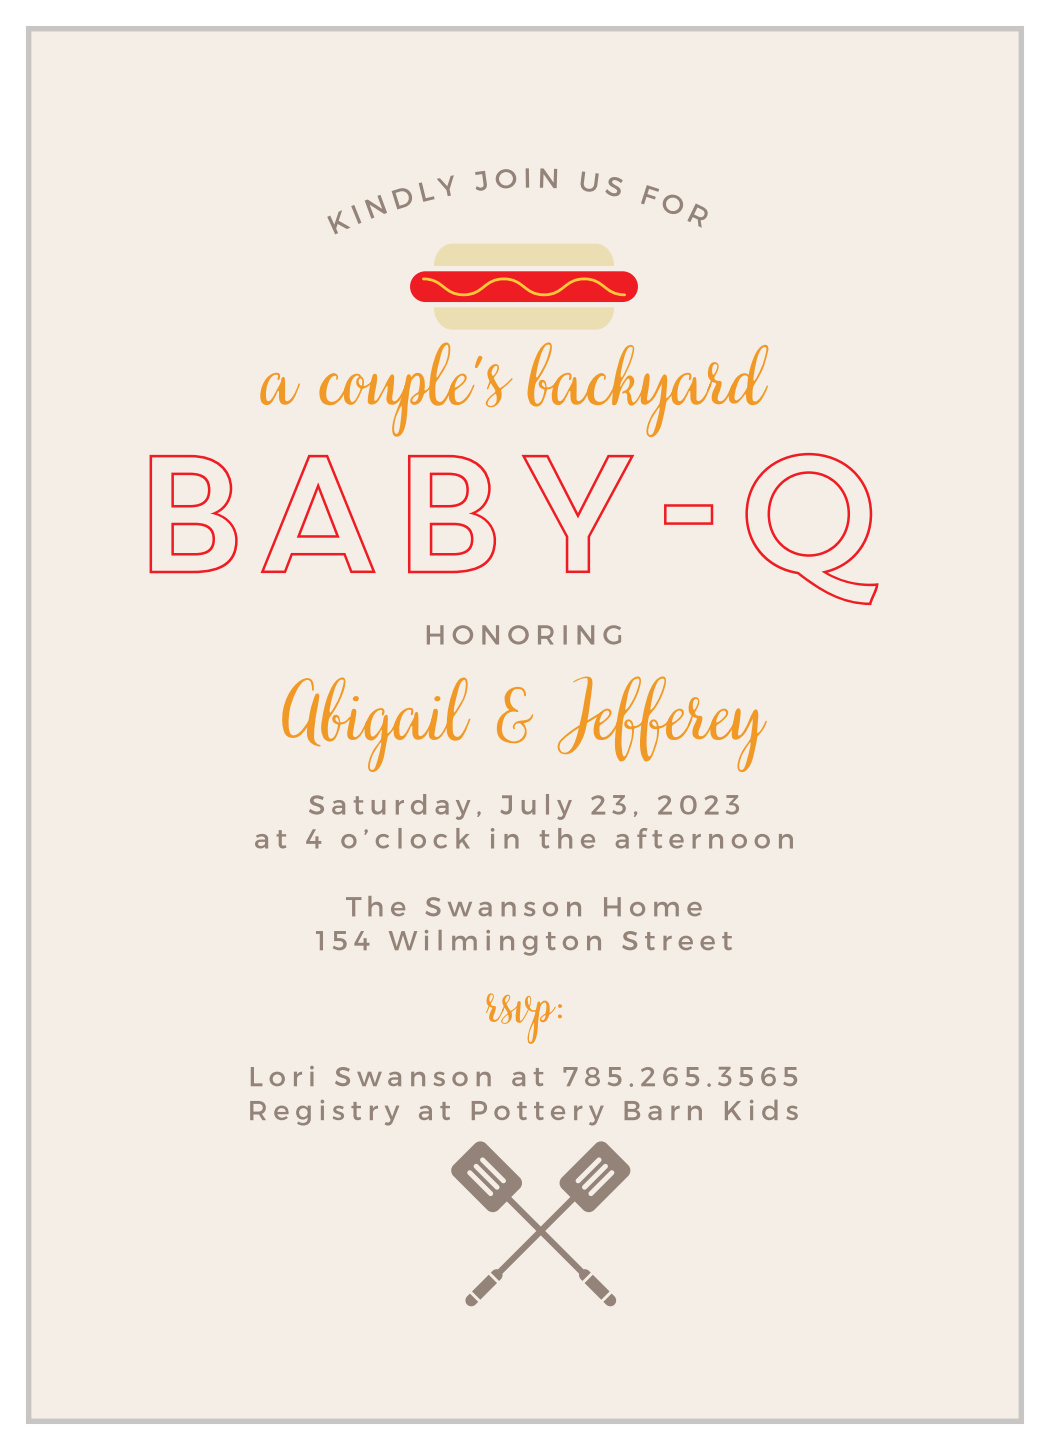 Baby-Q Baby Shower Invitations by Basic 